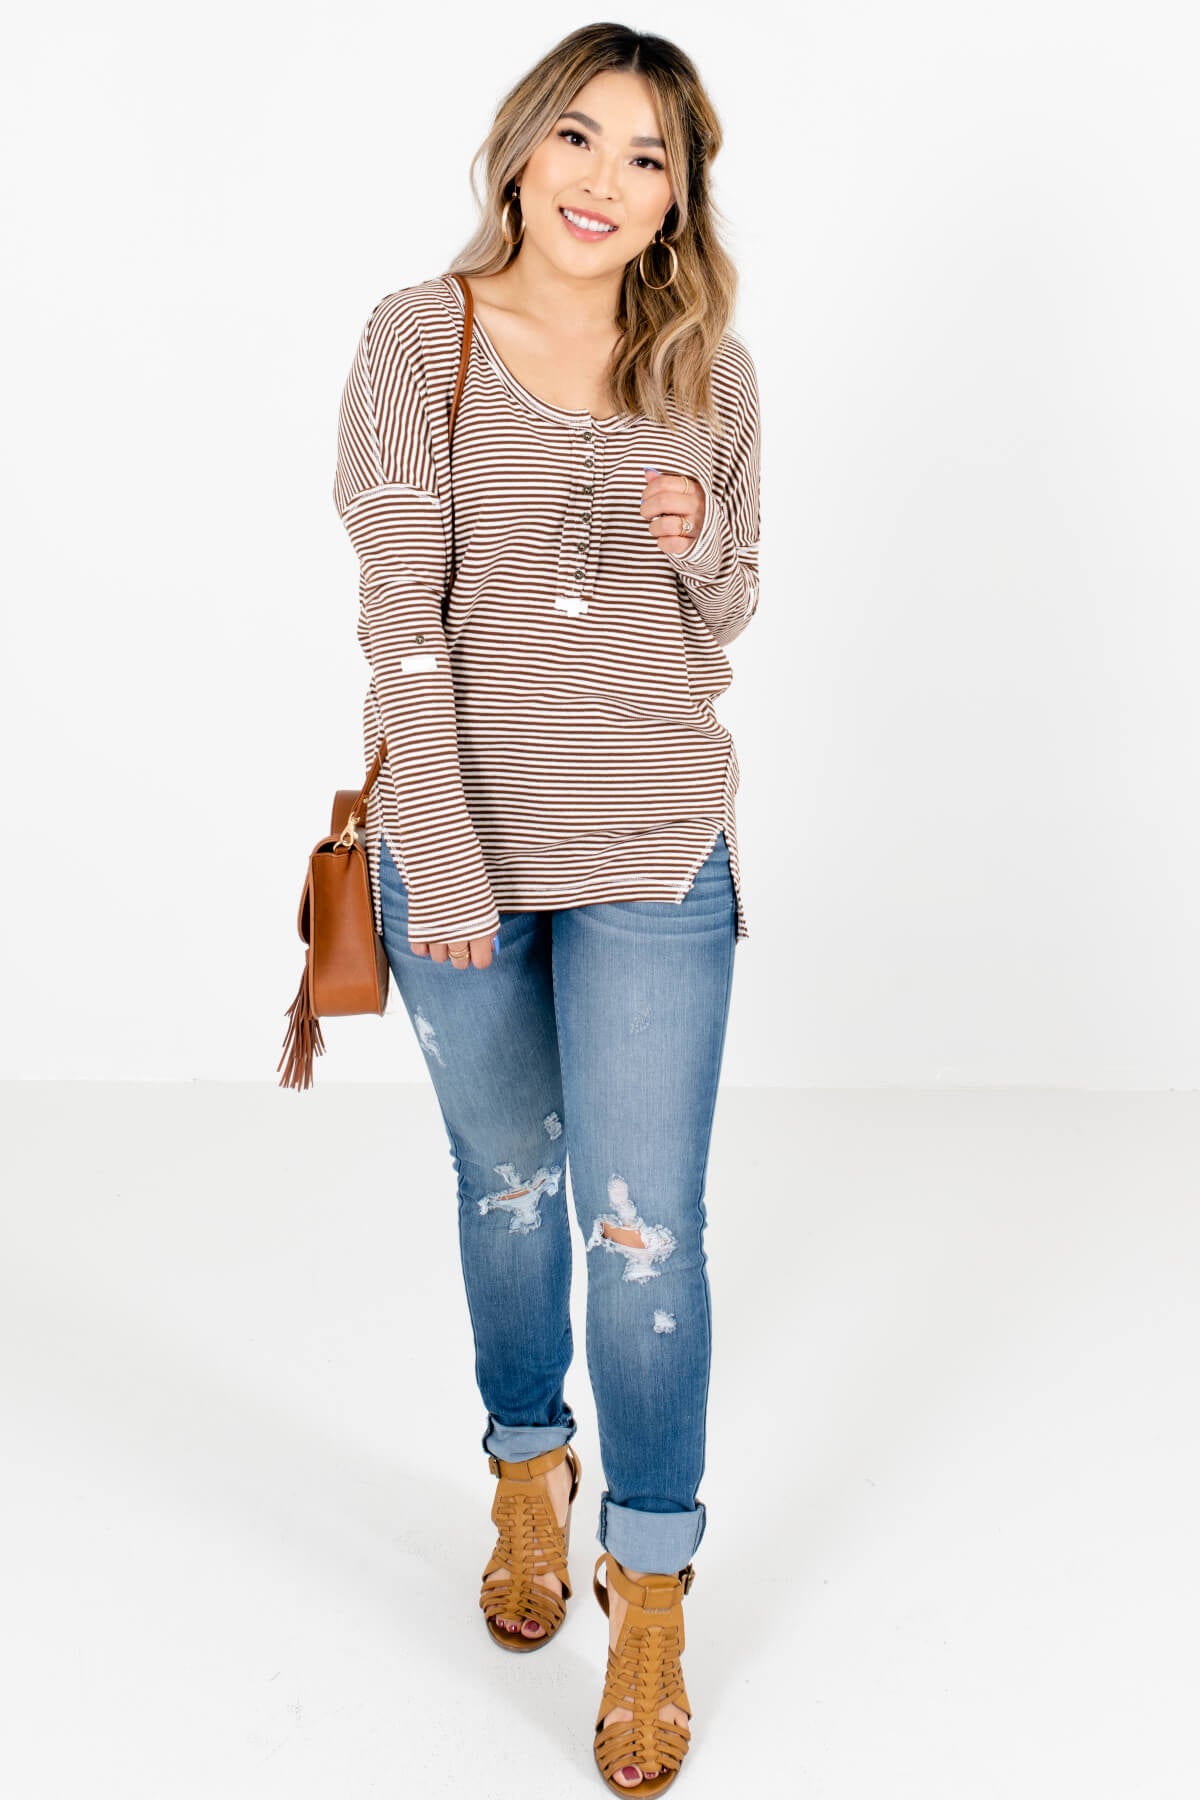 Brown Cute and Comfortable Boutique Tops for Women